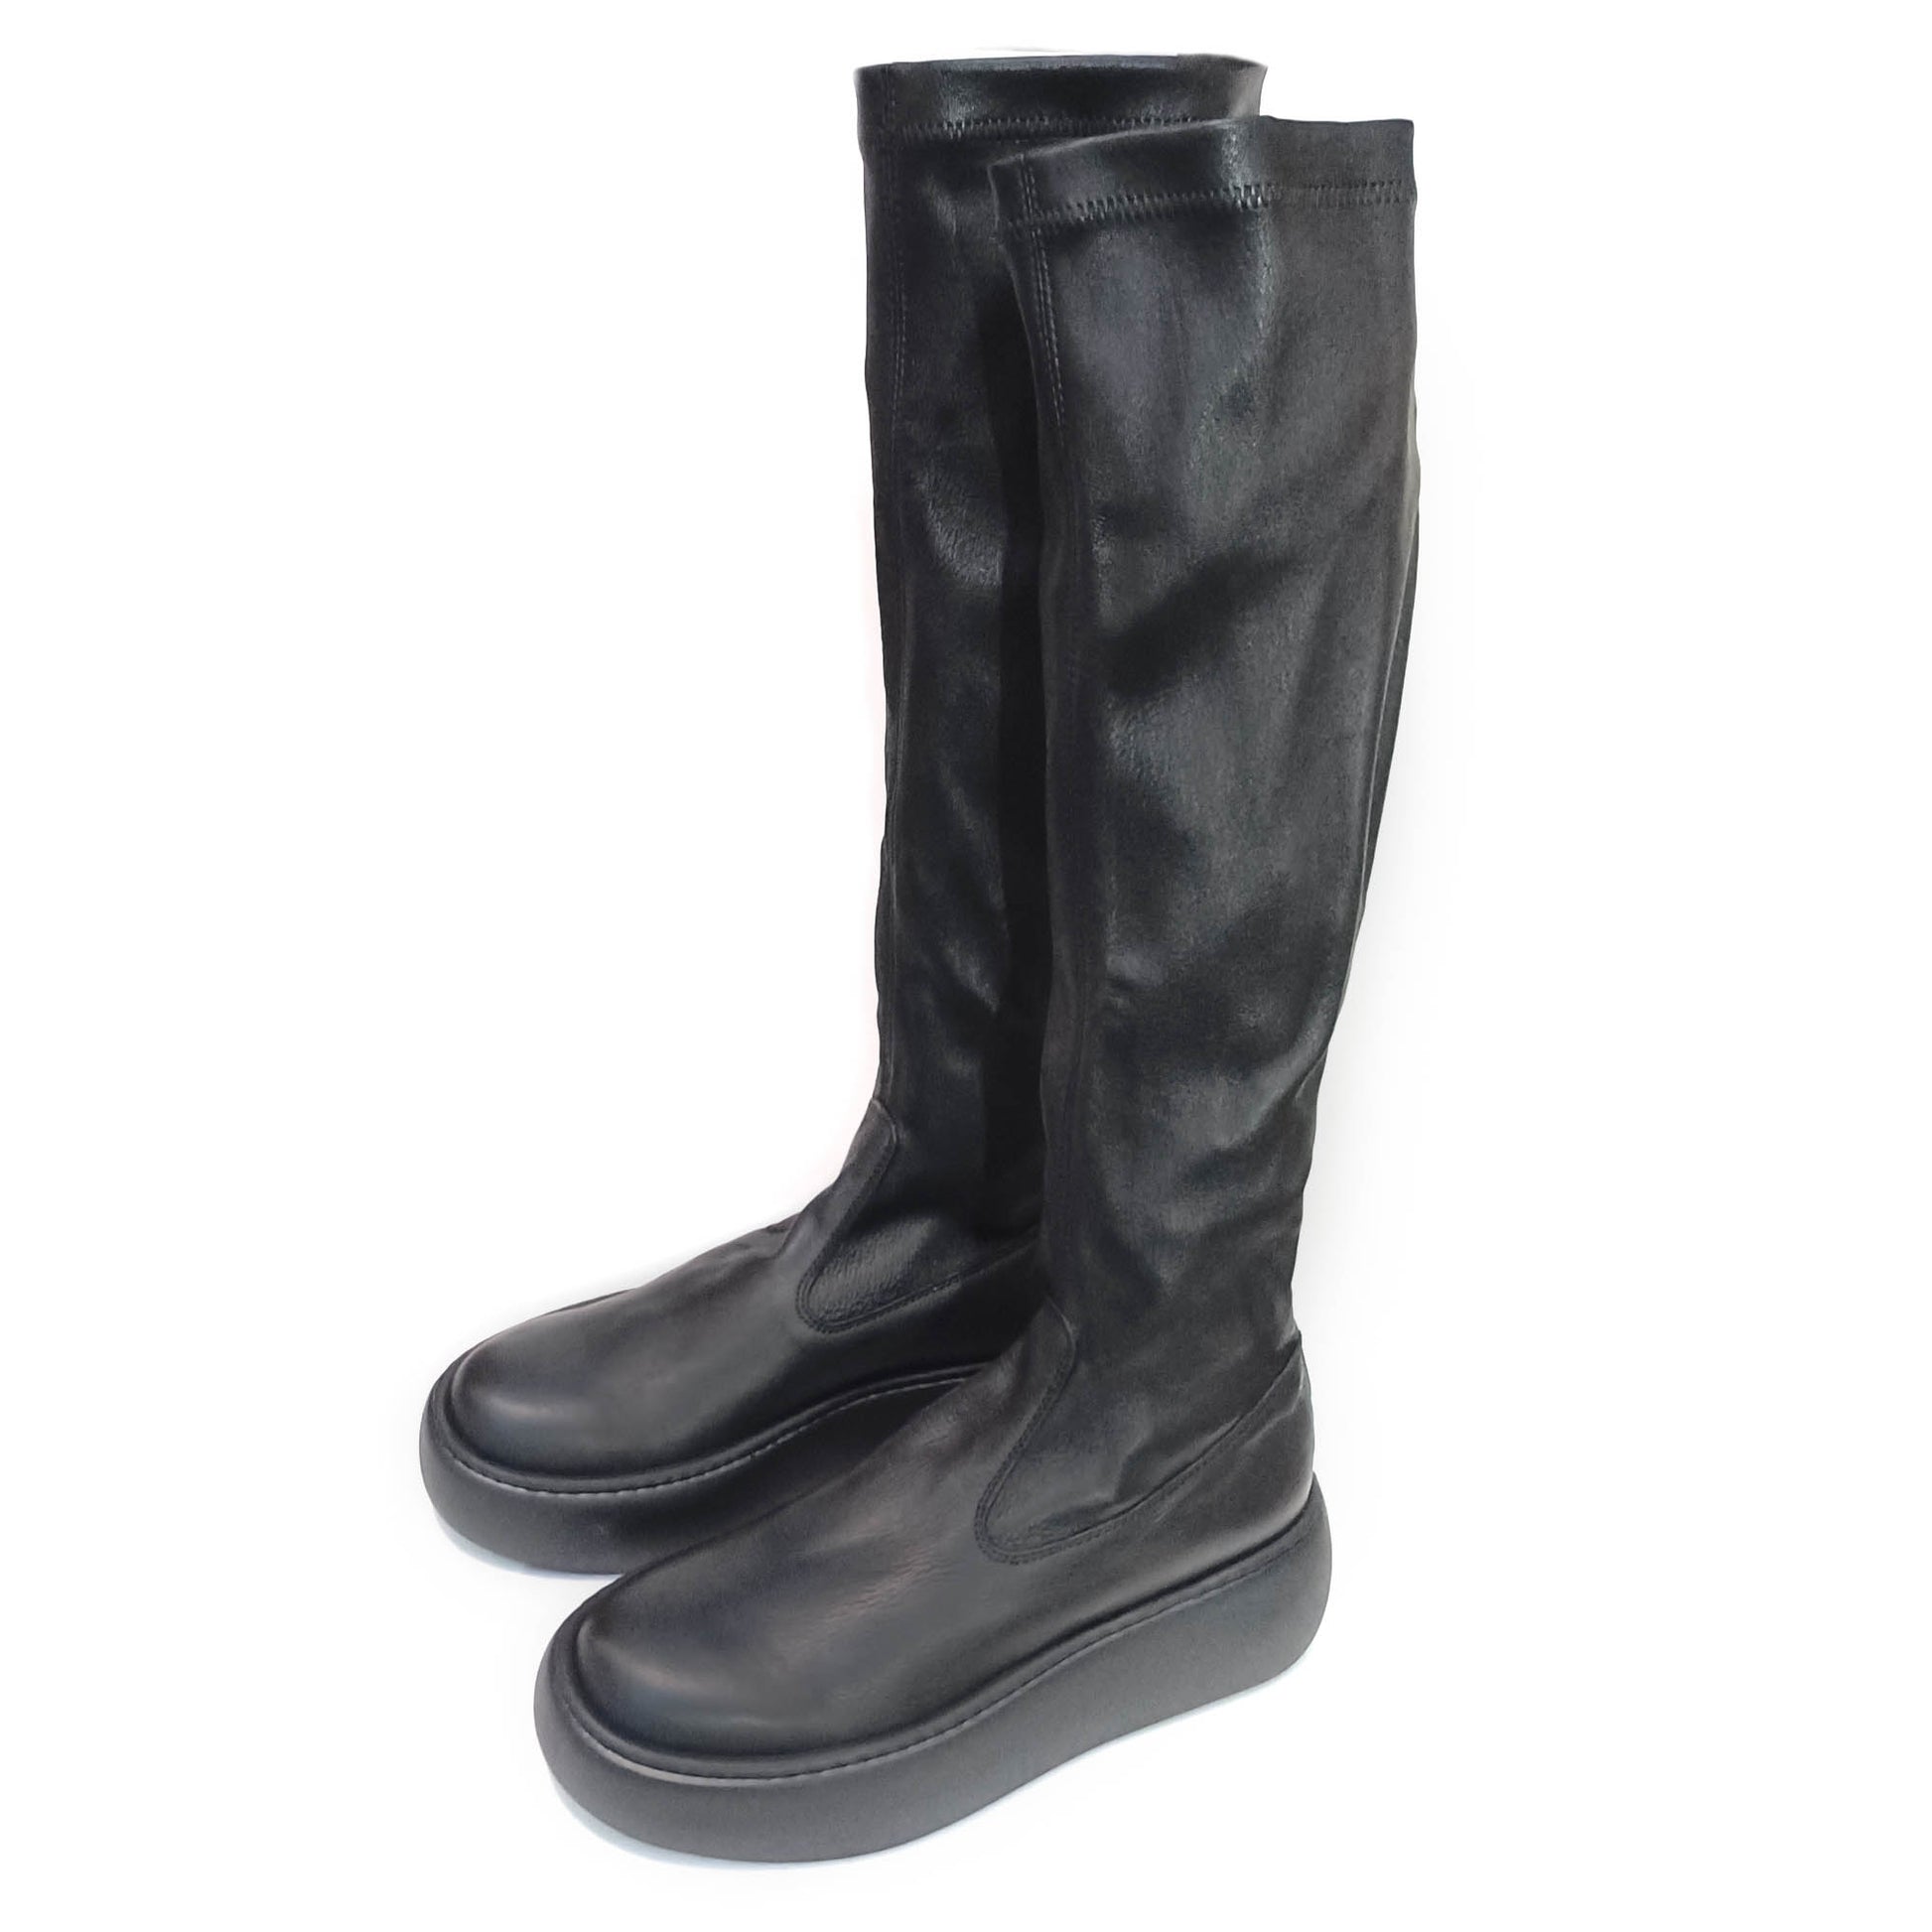 Stretch leather long boots